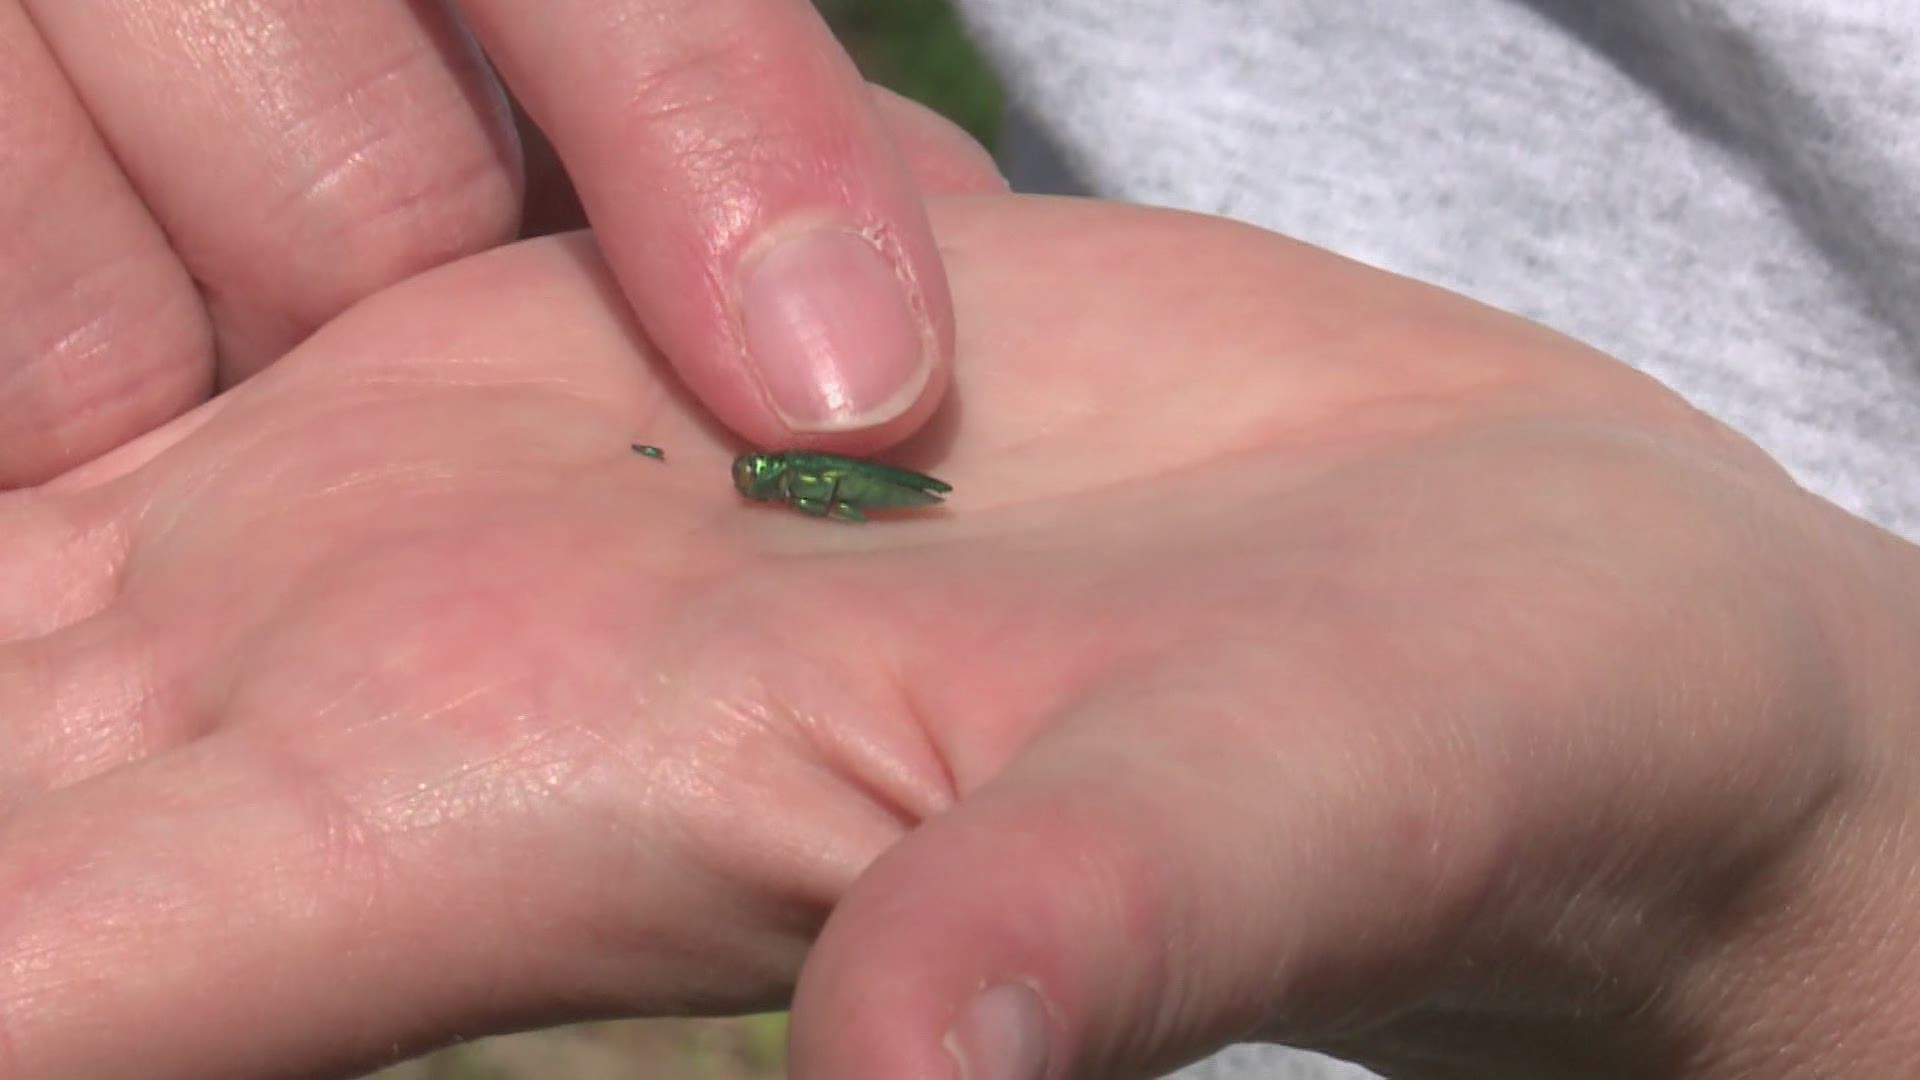 The invasive insect from Asia is a major threat to ash trees here in Maine.